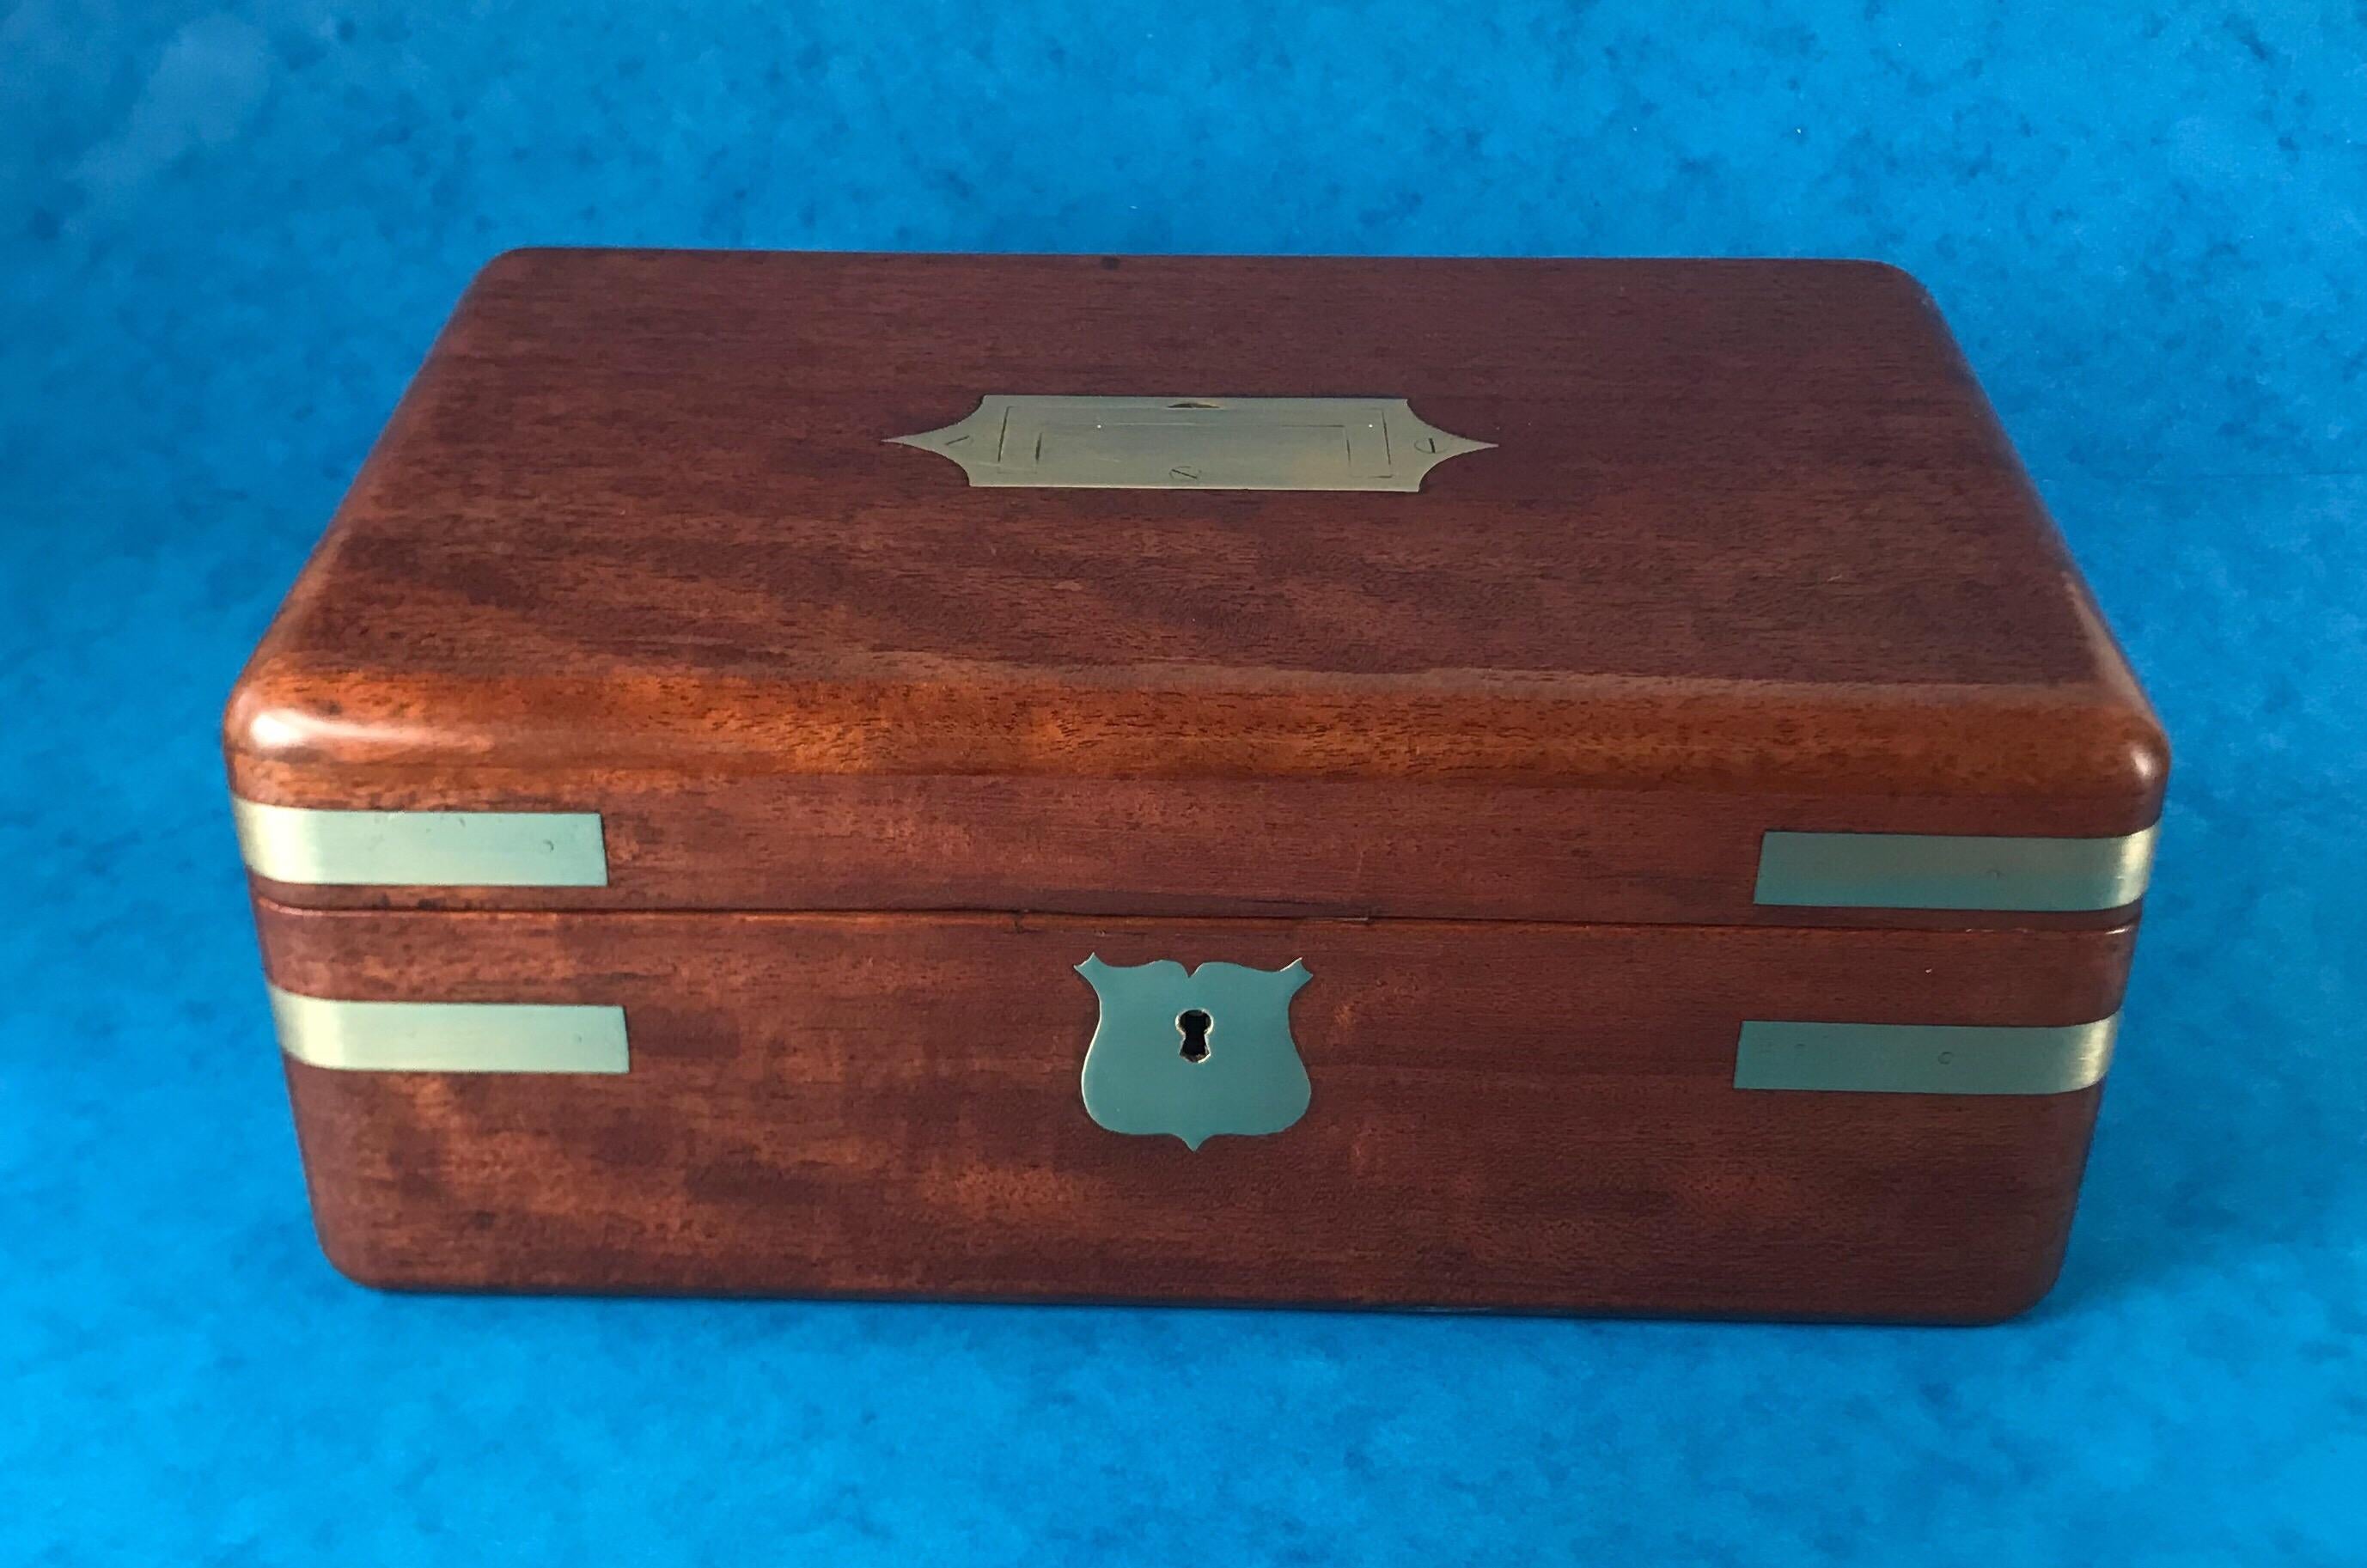 A early 19th century, Victorian 1840 brass bound solid mahogany Campaign box with a relined interior, it has a military handle to the top, it has its original key but the key doesn’t work the lock. It measures 26 by 17 and stands 11 cm high.